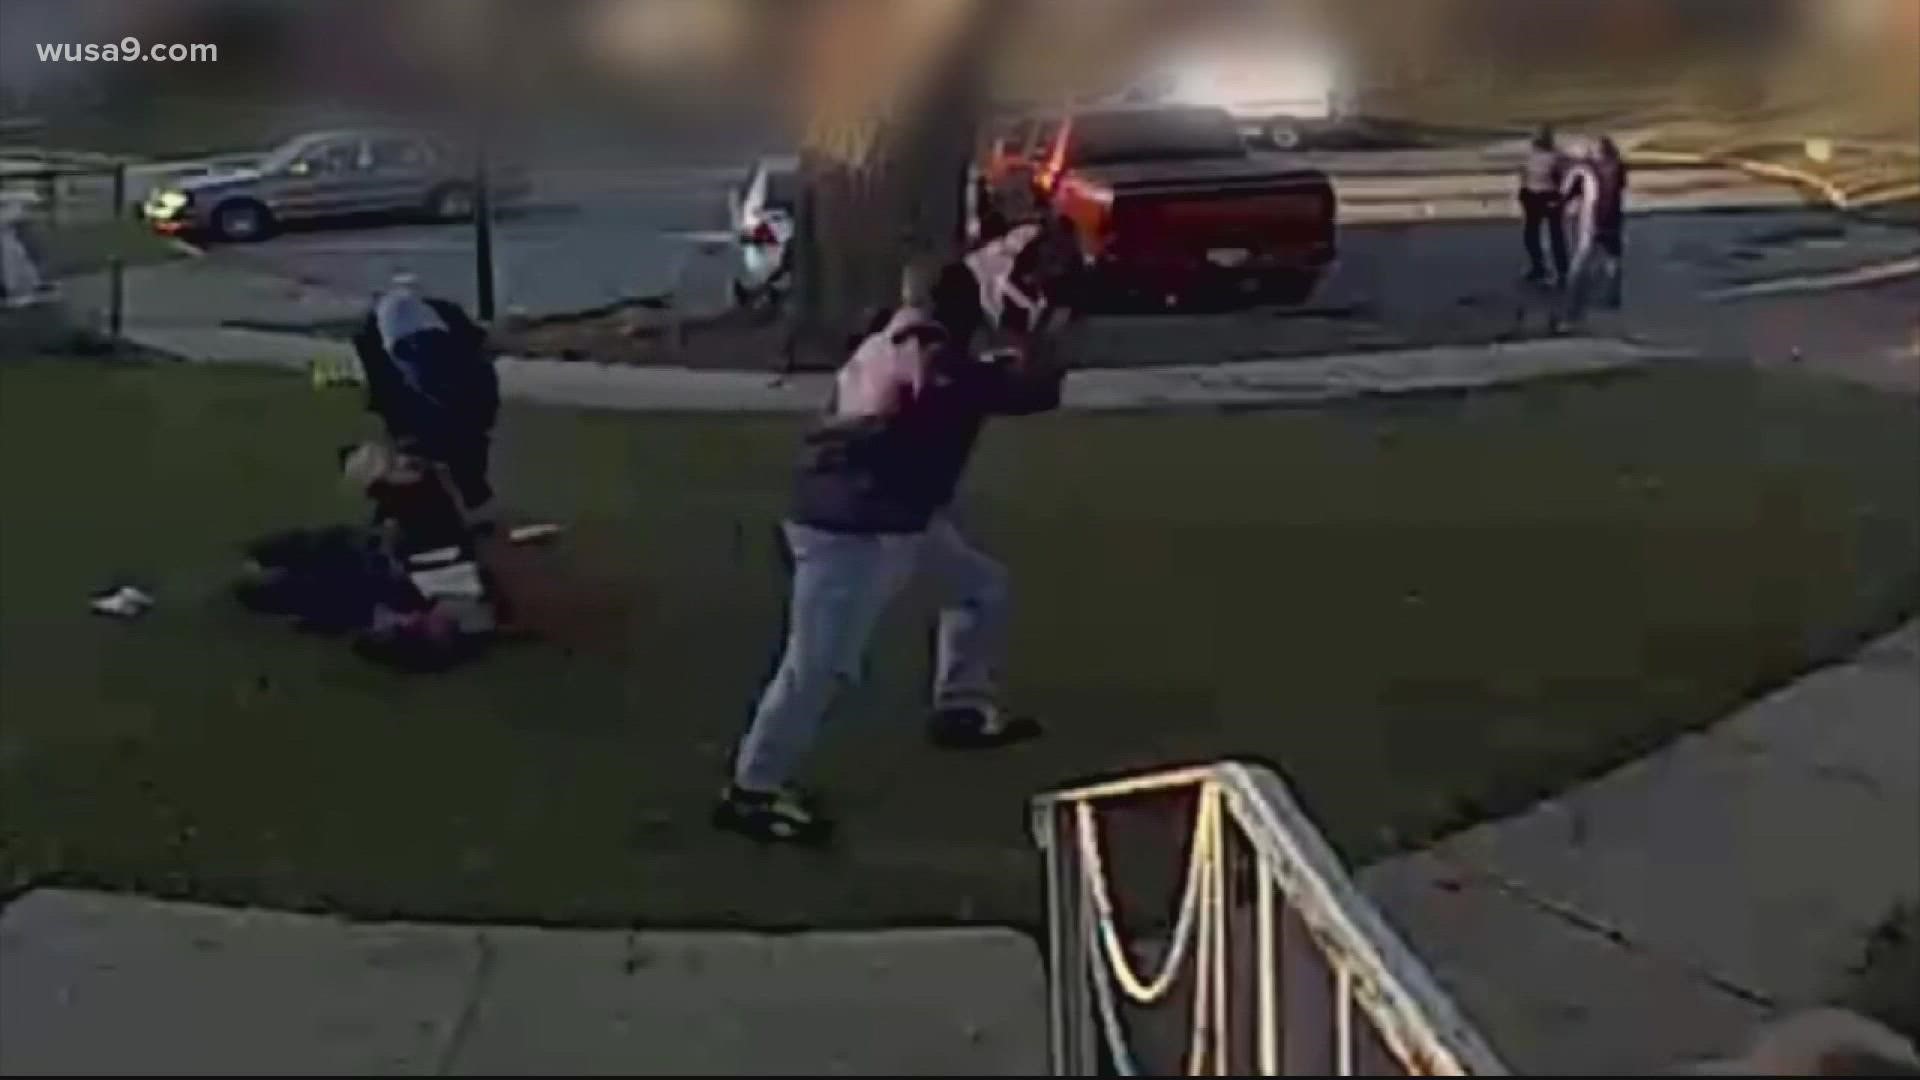 A woman in her sixties was assaulted outside her home in Capitol Heights March 29, police say. The incident was caught on video and police are looking for 4 suspects